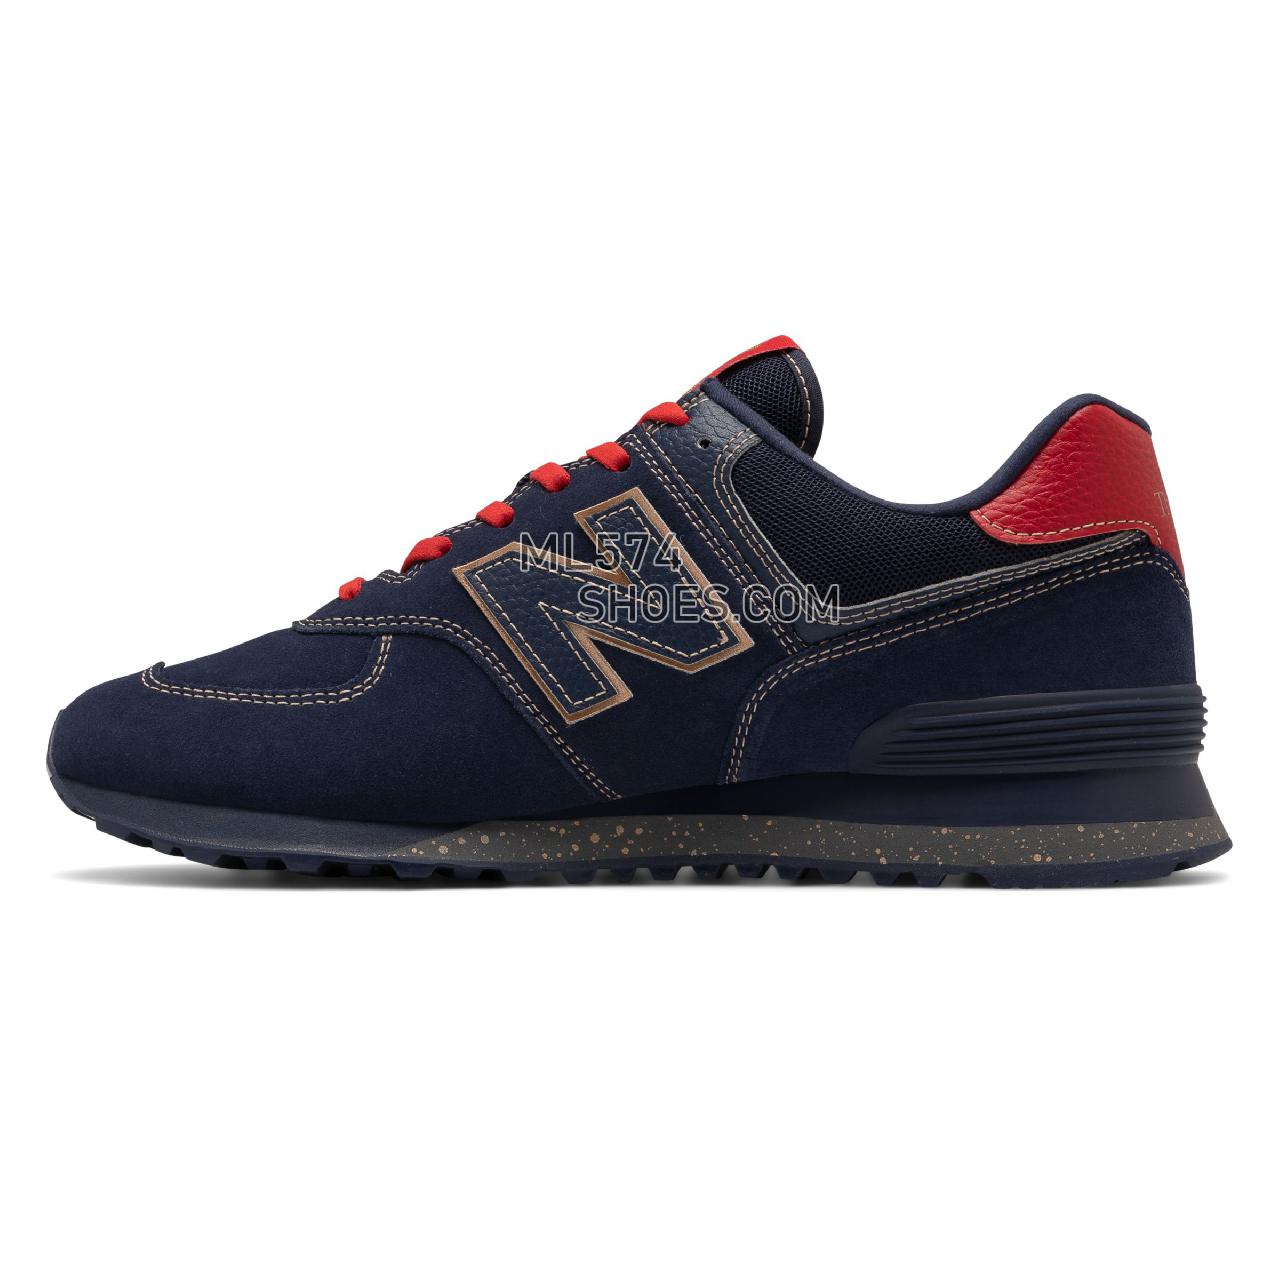 New Balance 574 Inspire The Dream - Men's Classic Sneakers - Team Navy with Team Red - U574BHM